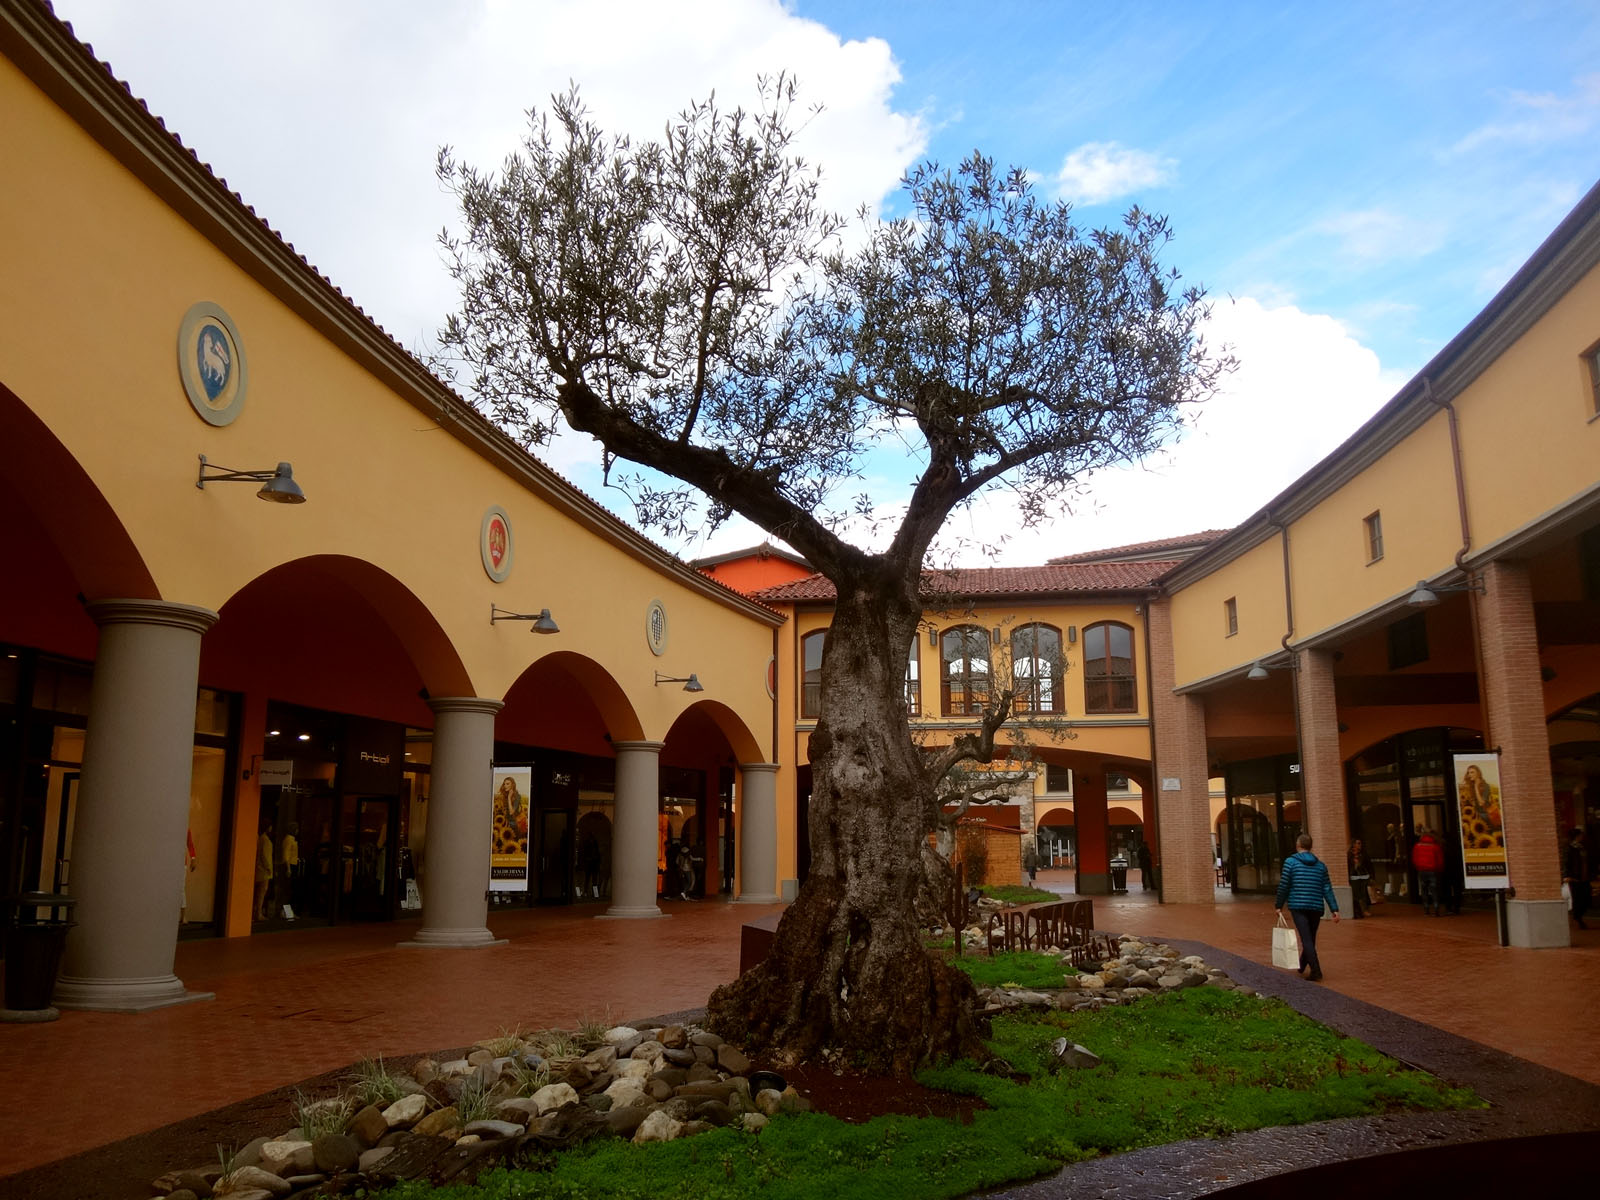 McDonald’s and the Valdichiana Outlet Mall in Italy – GoGrano